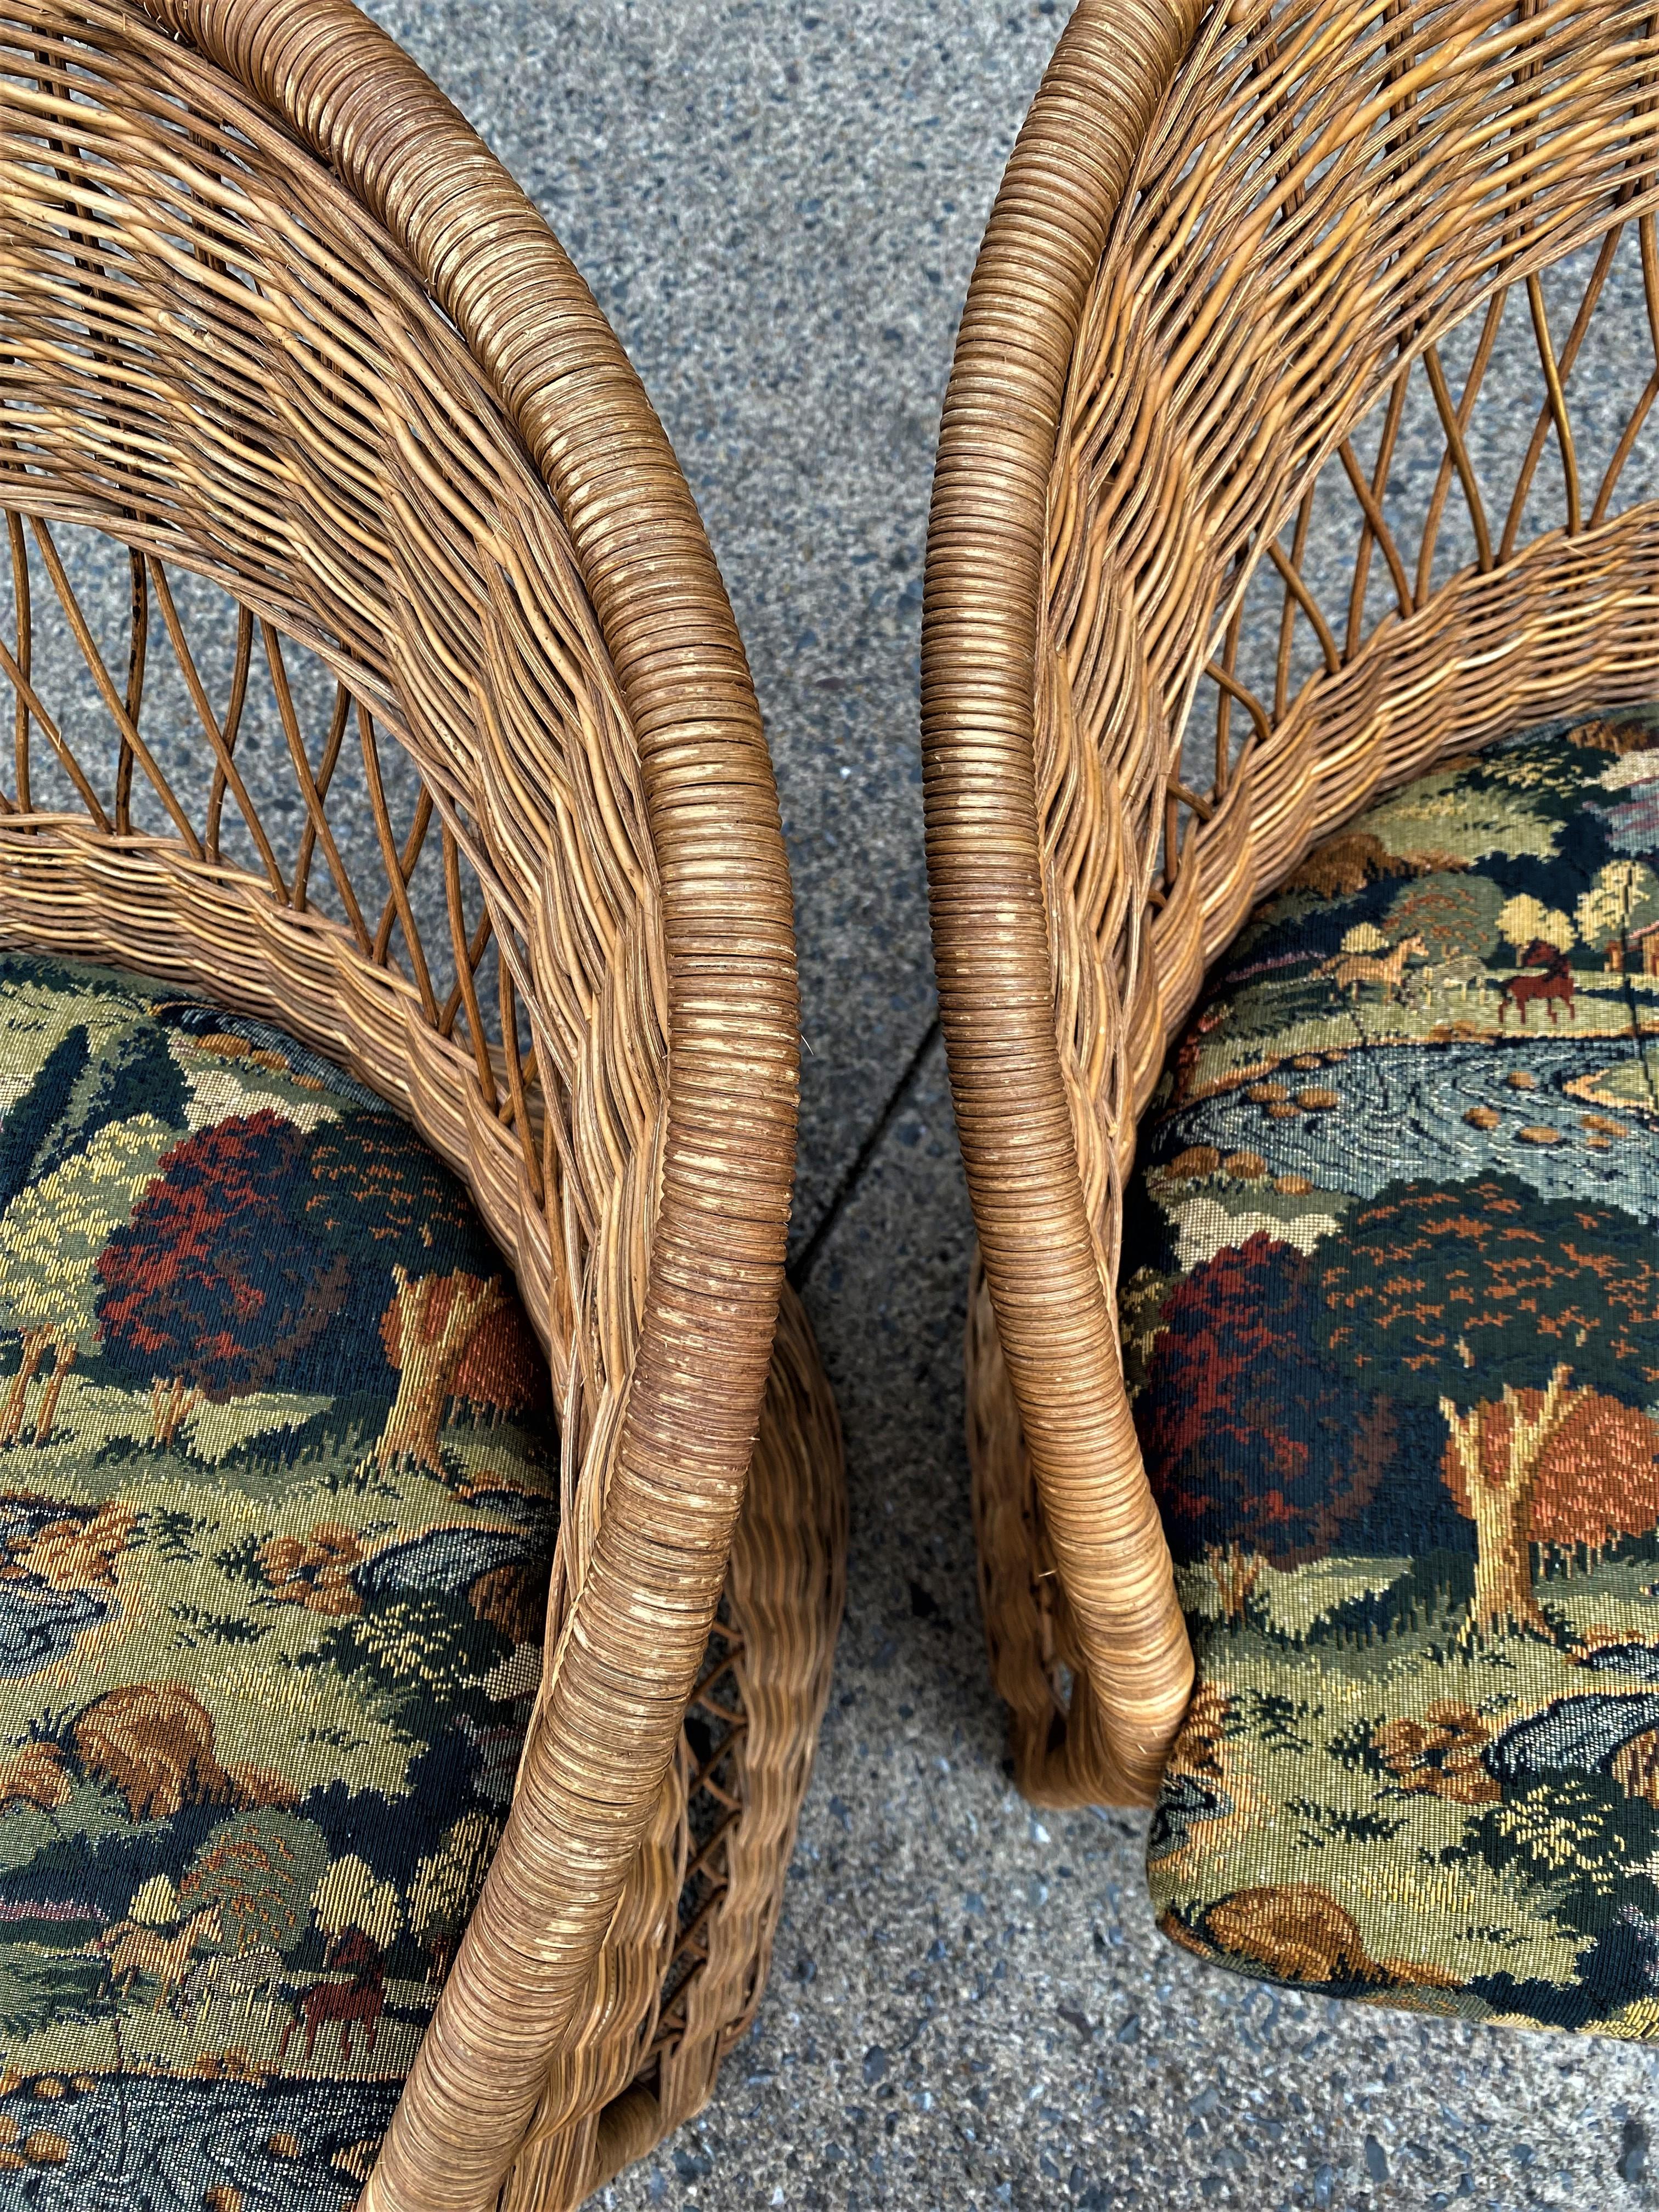 Natural Wicker/Rattan Mid Century Tulip/Barrel Chairs W/ Fishing Upholstery Pair For Sale 3